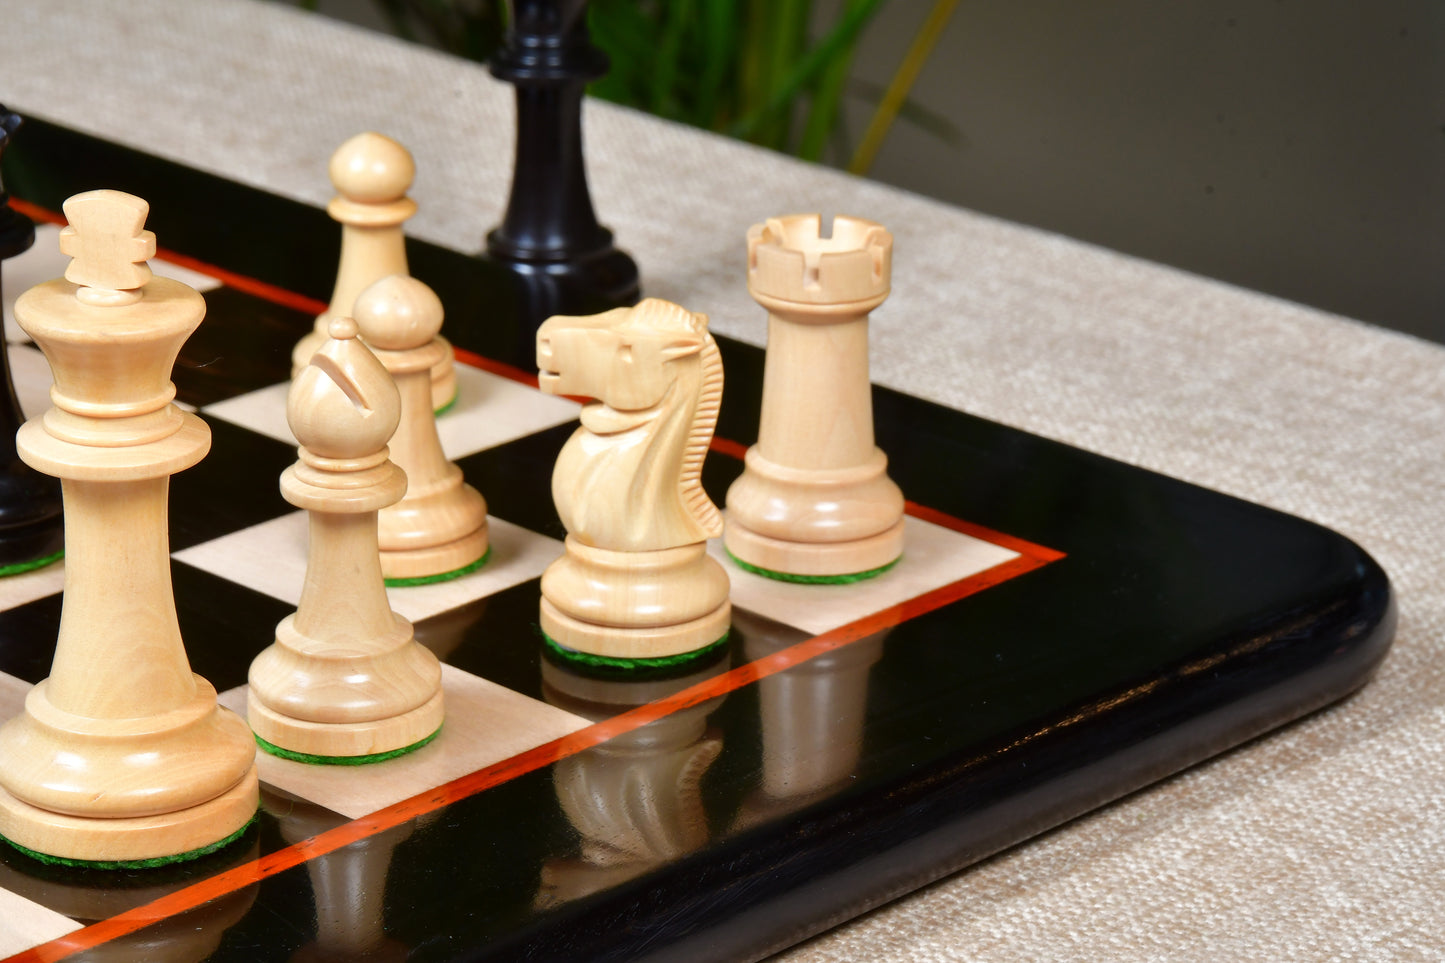 The Canadian Staunton Series Chess Pieces in Ebonized Boxwood / Natural Boxwood - 3.3" King